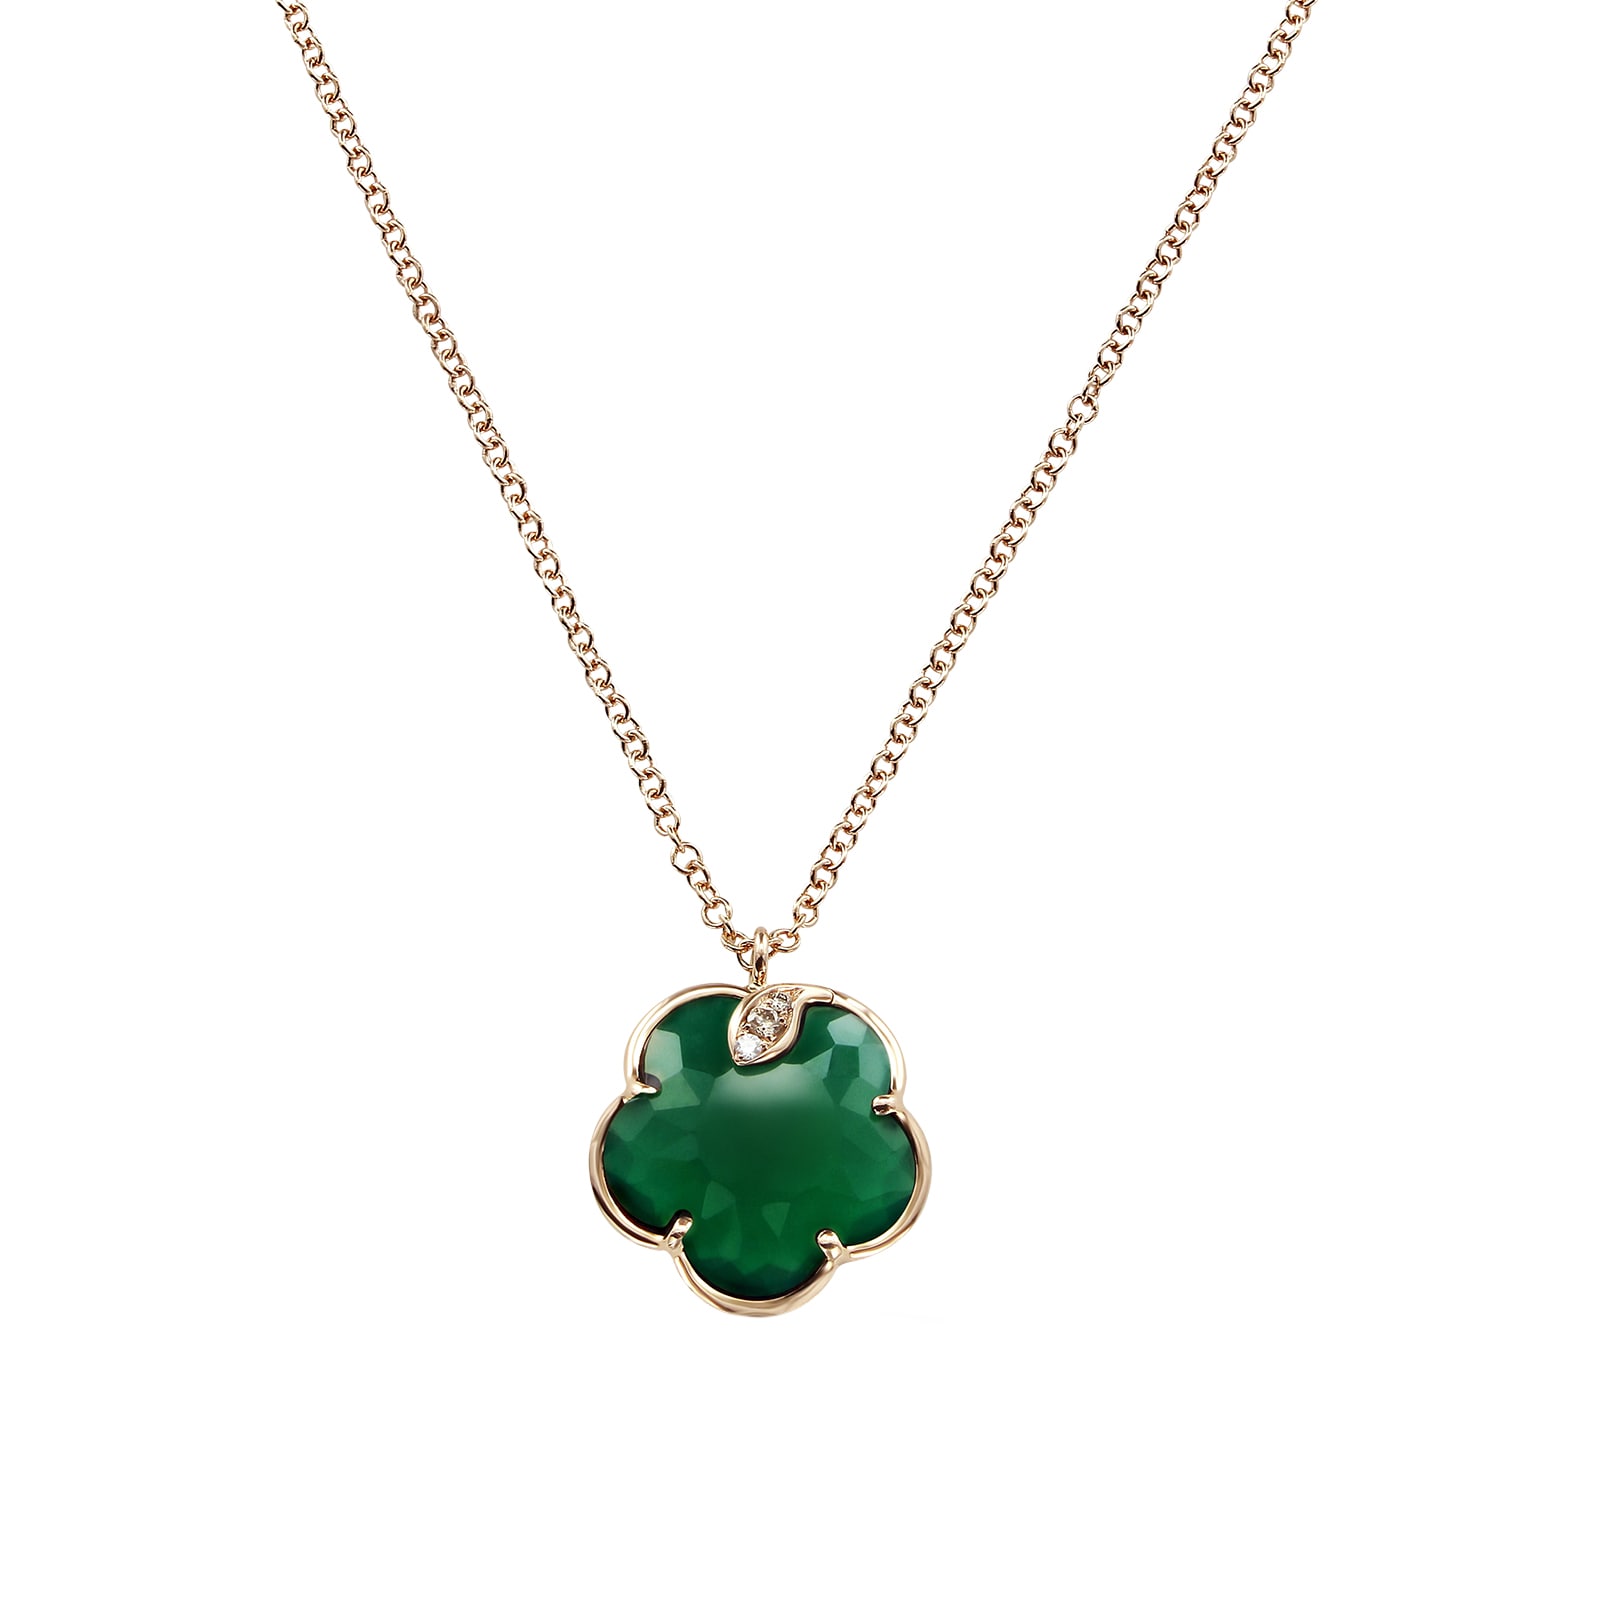 Petit Joli Necklace in 18ct Rose Gold with Green Agate and Diamonds